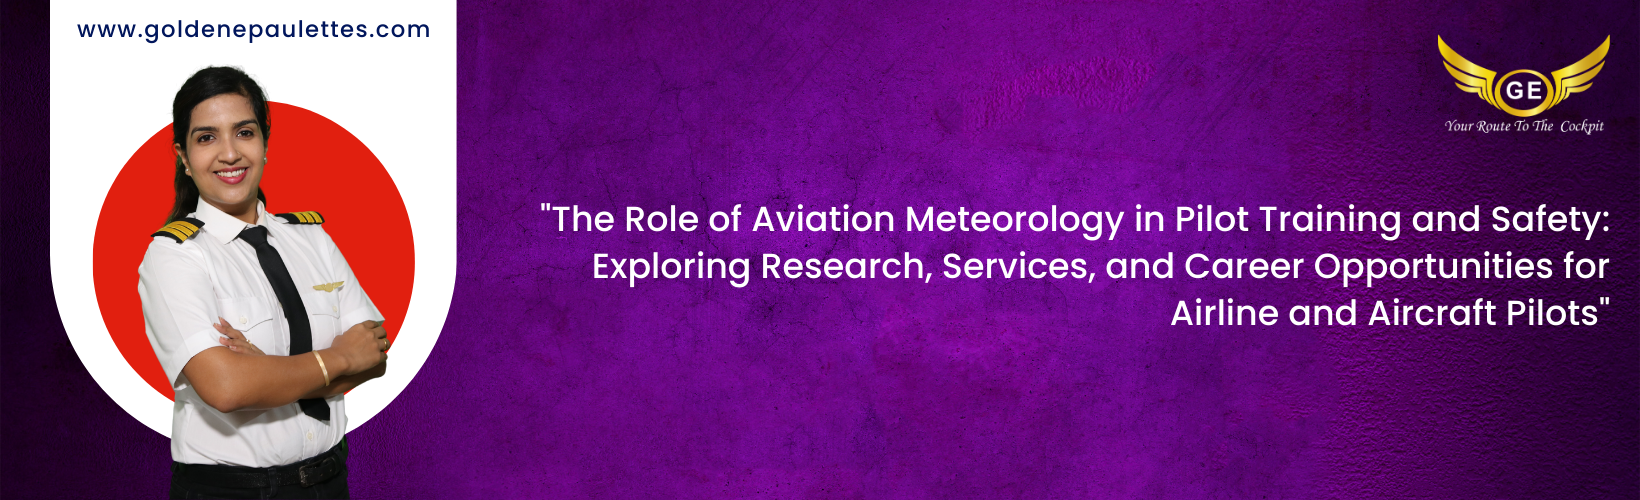 The Role of Aviation Meteorology in Aviation Safety